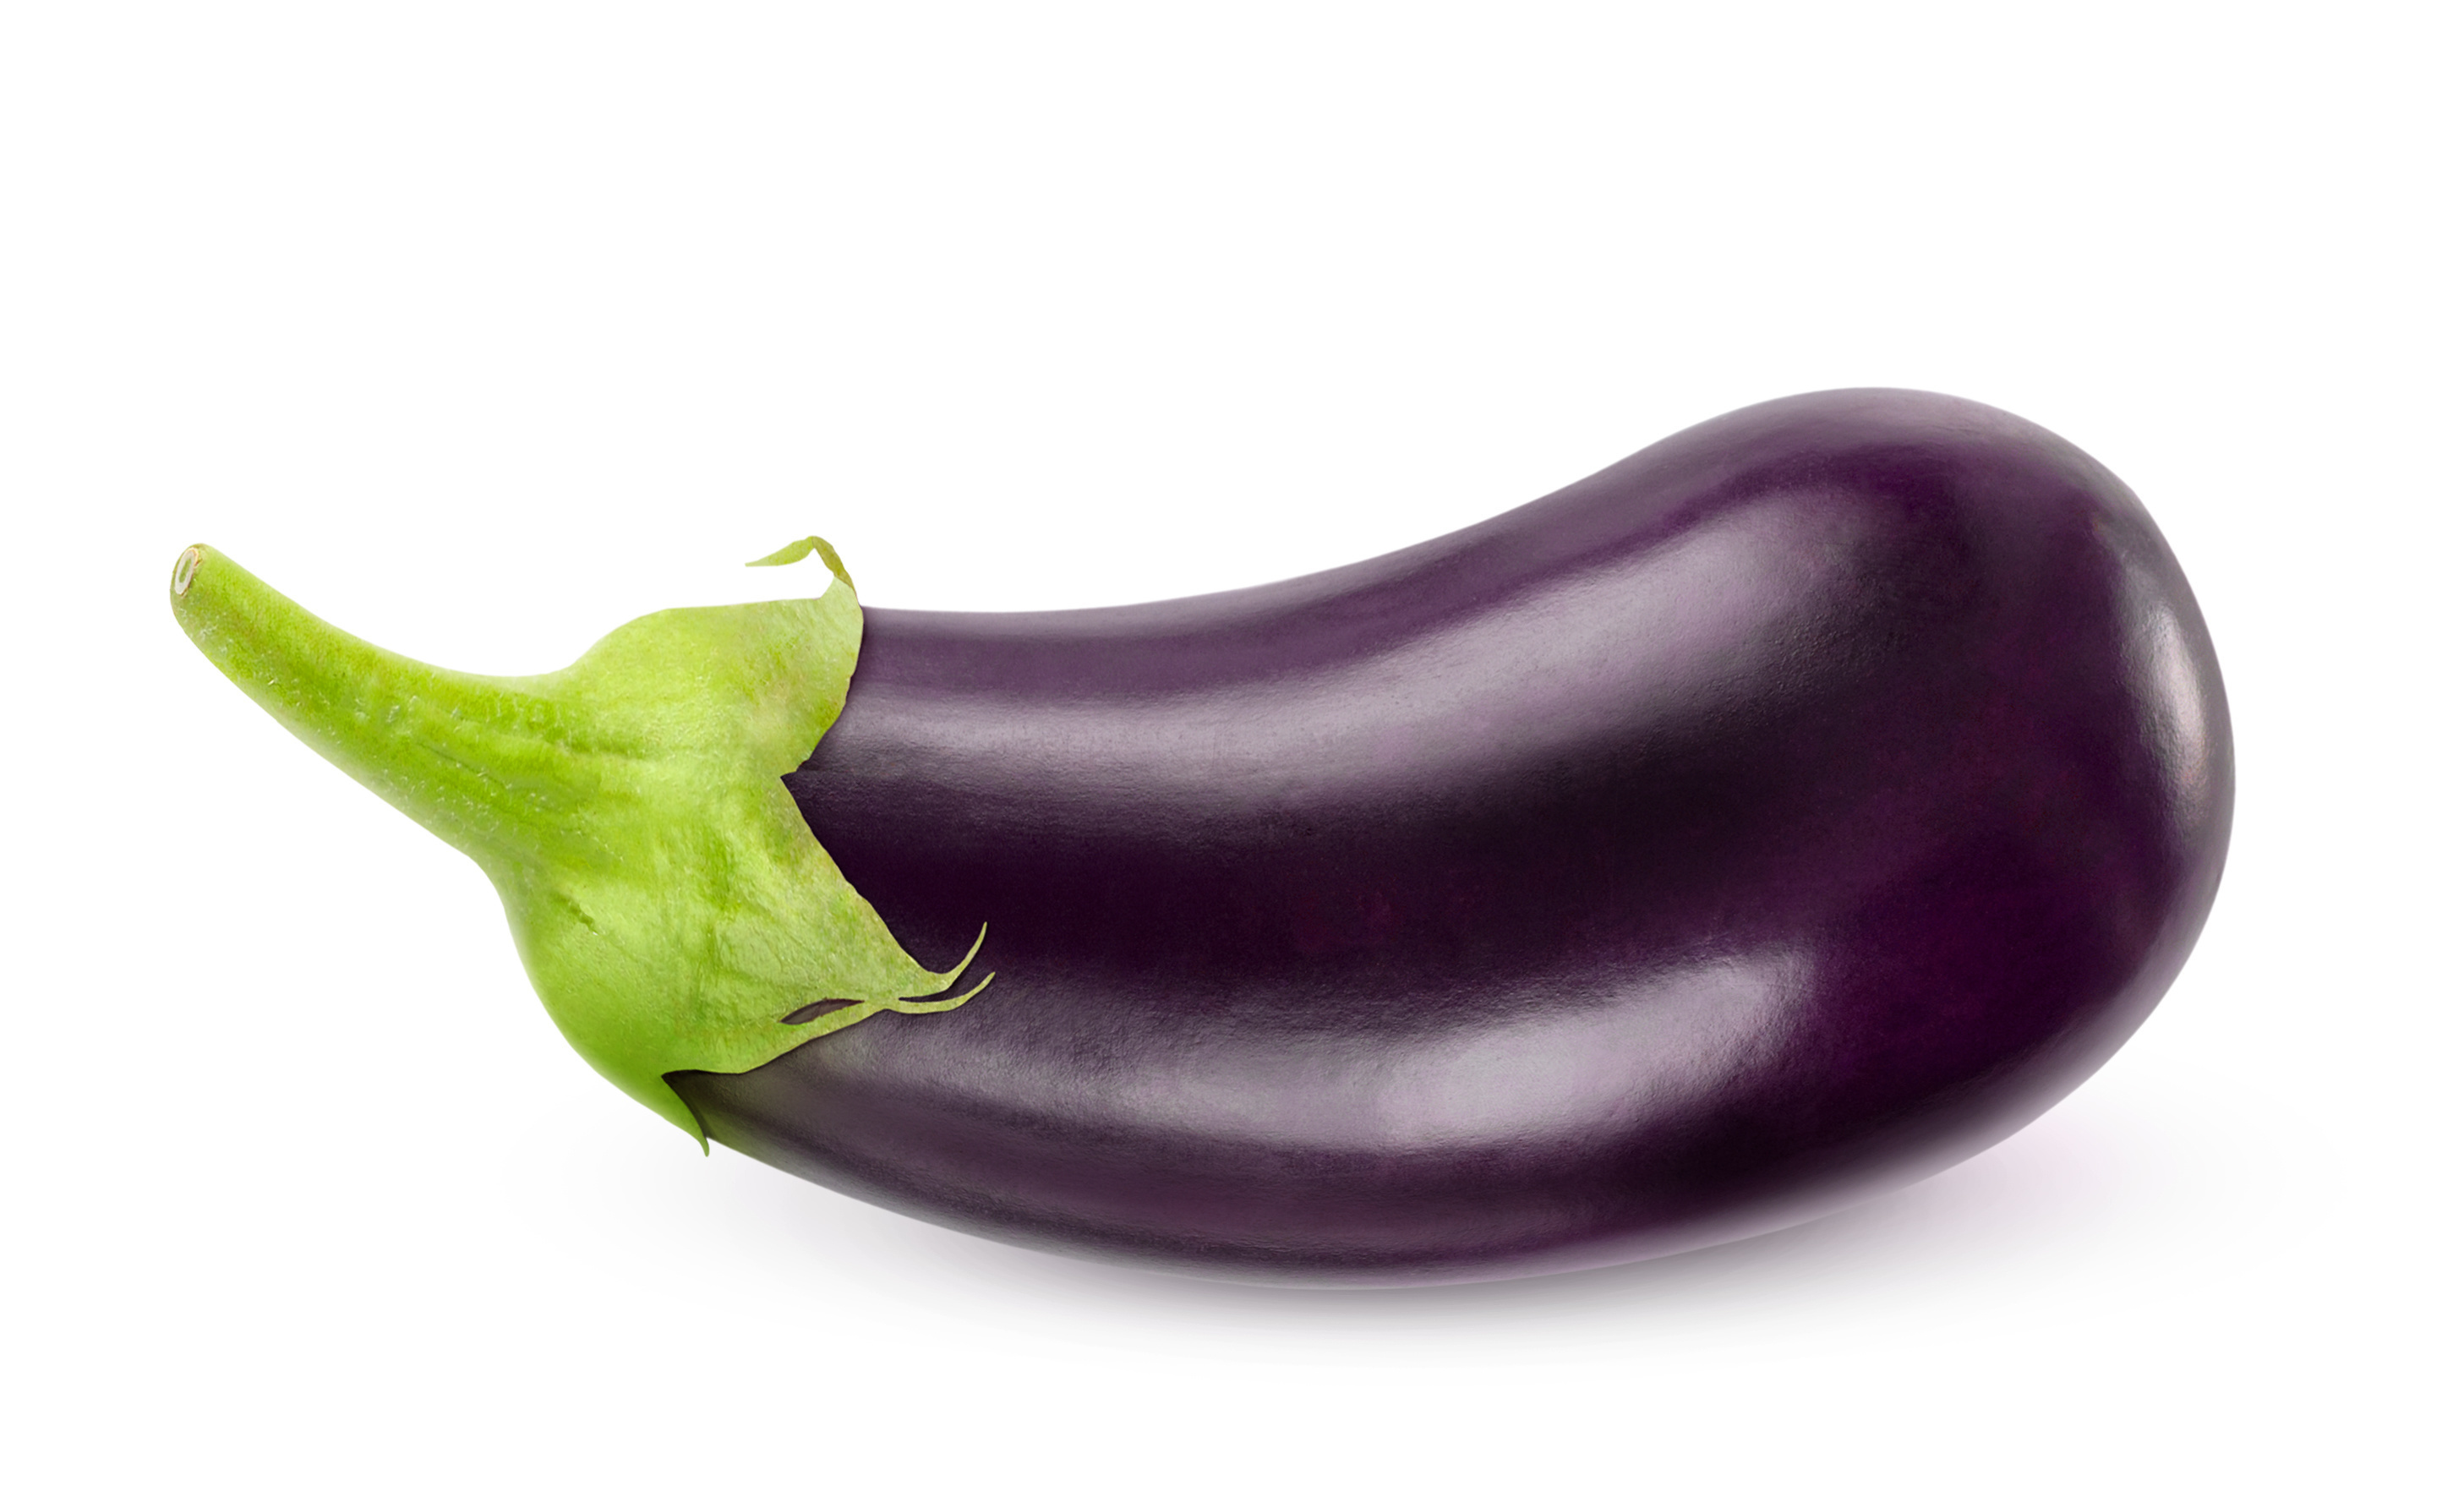 Aubergine～From the United Kingdom